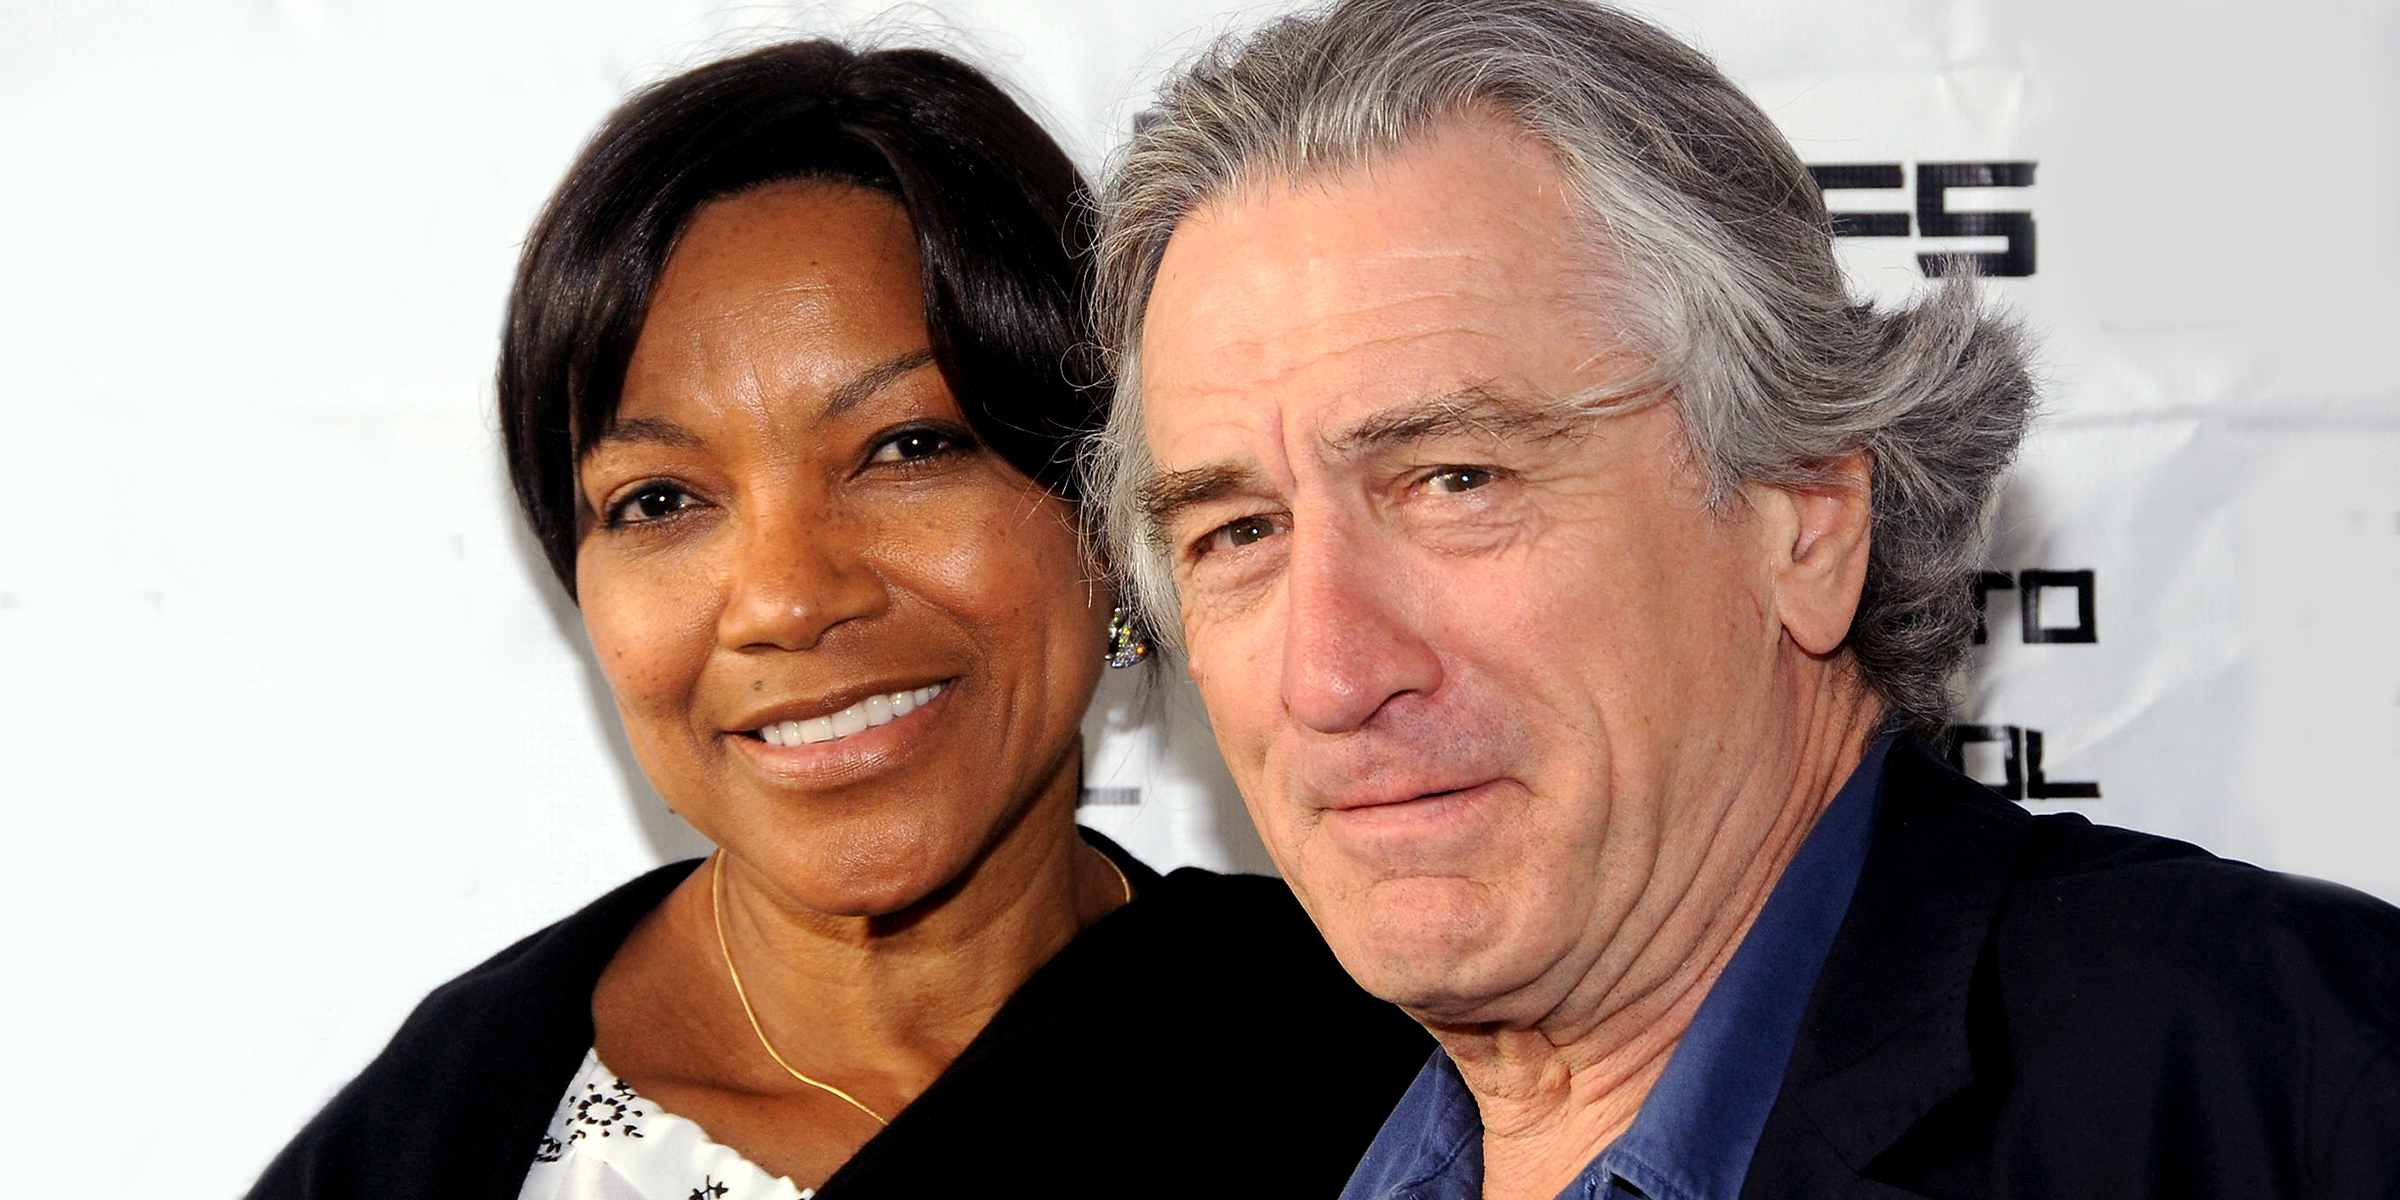 Robert De Niro and his ex-wife Grace Hightower | Source: Getty Images